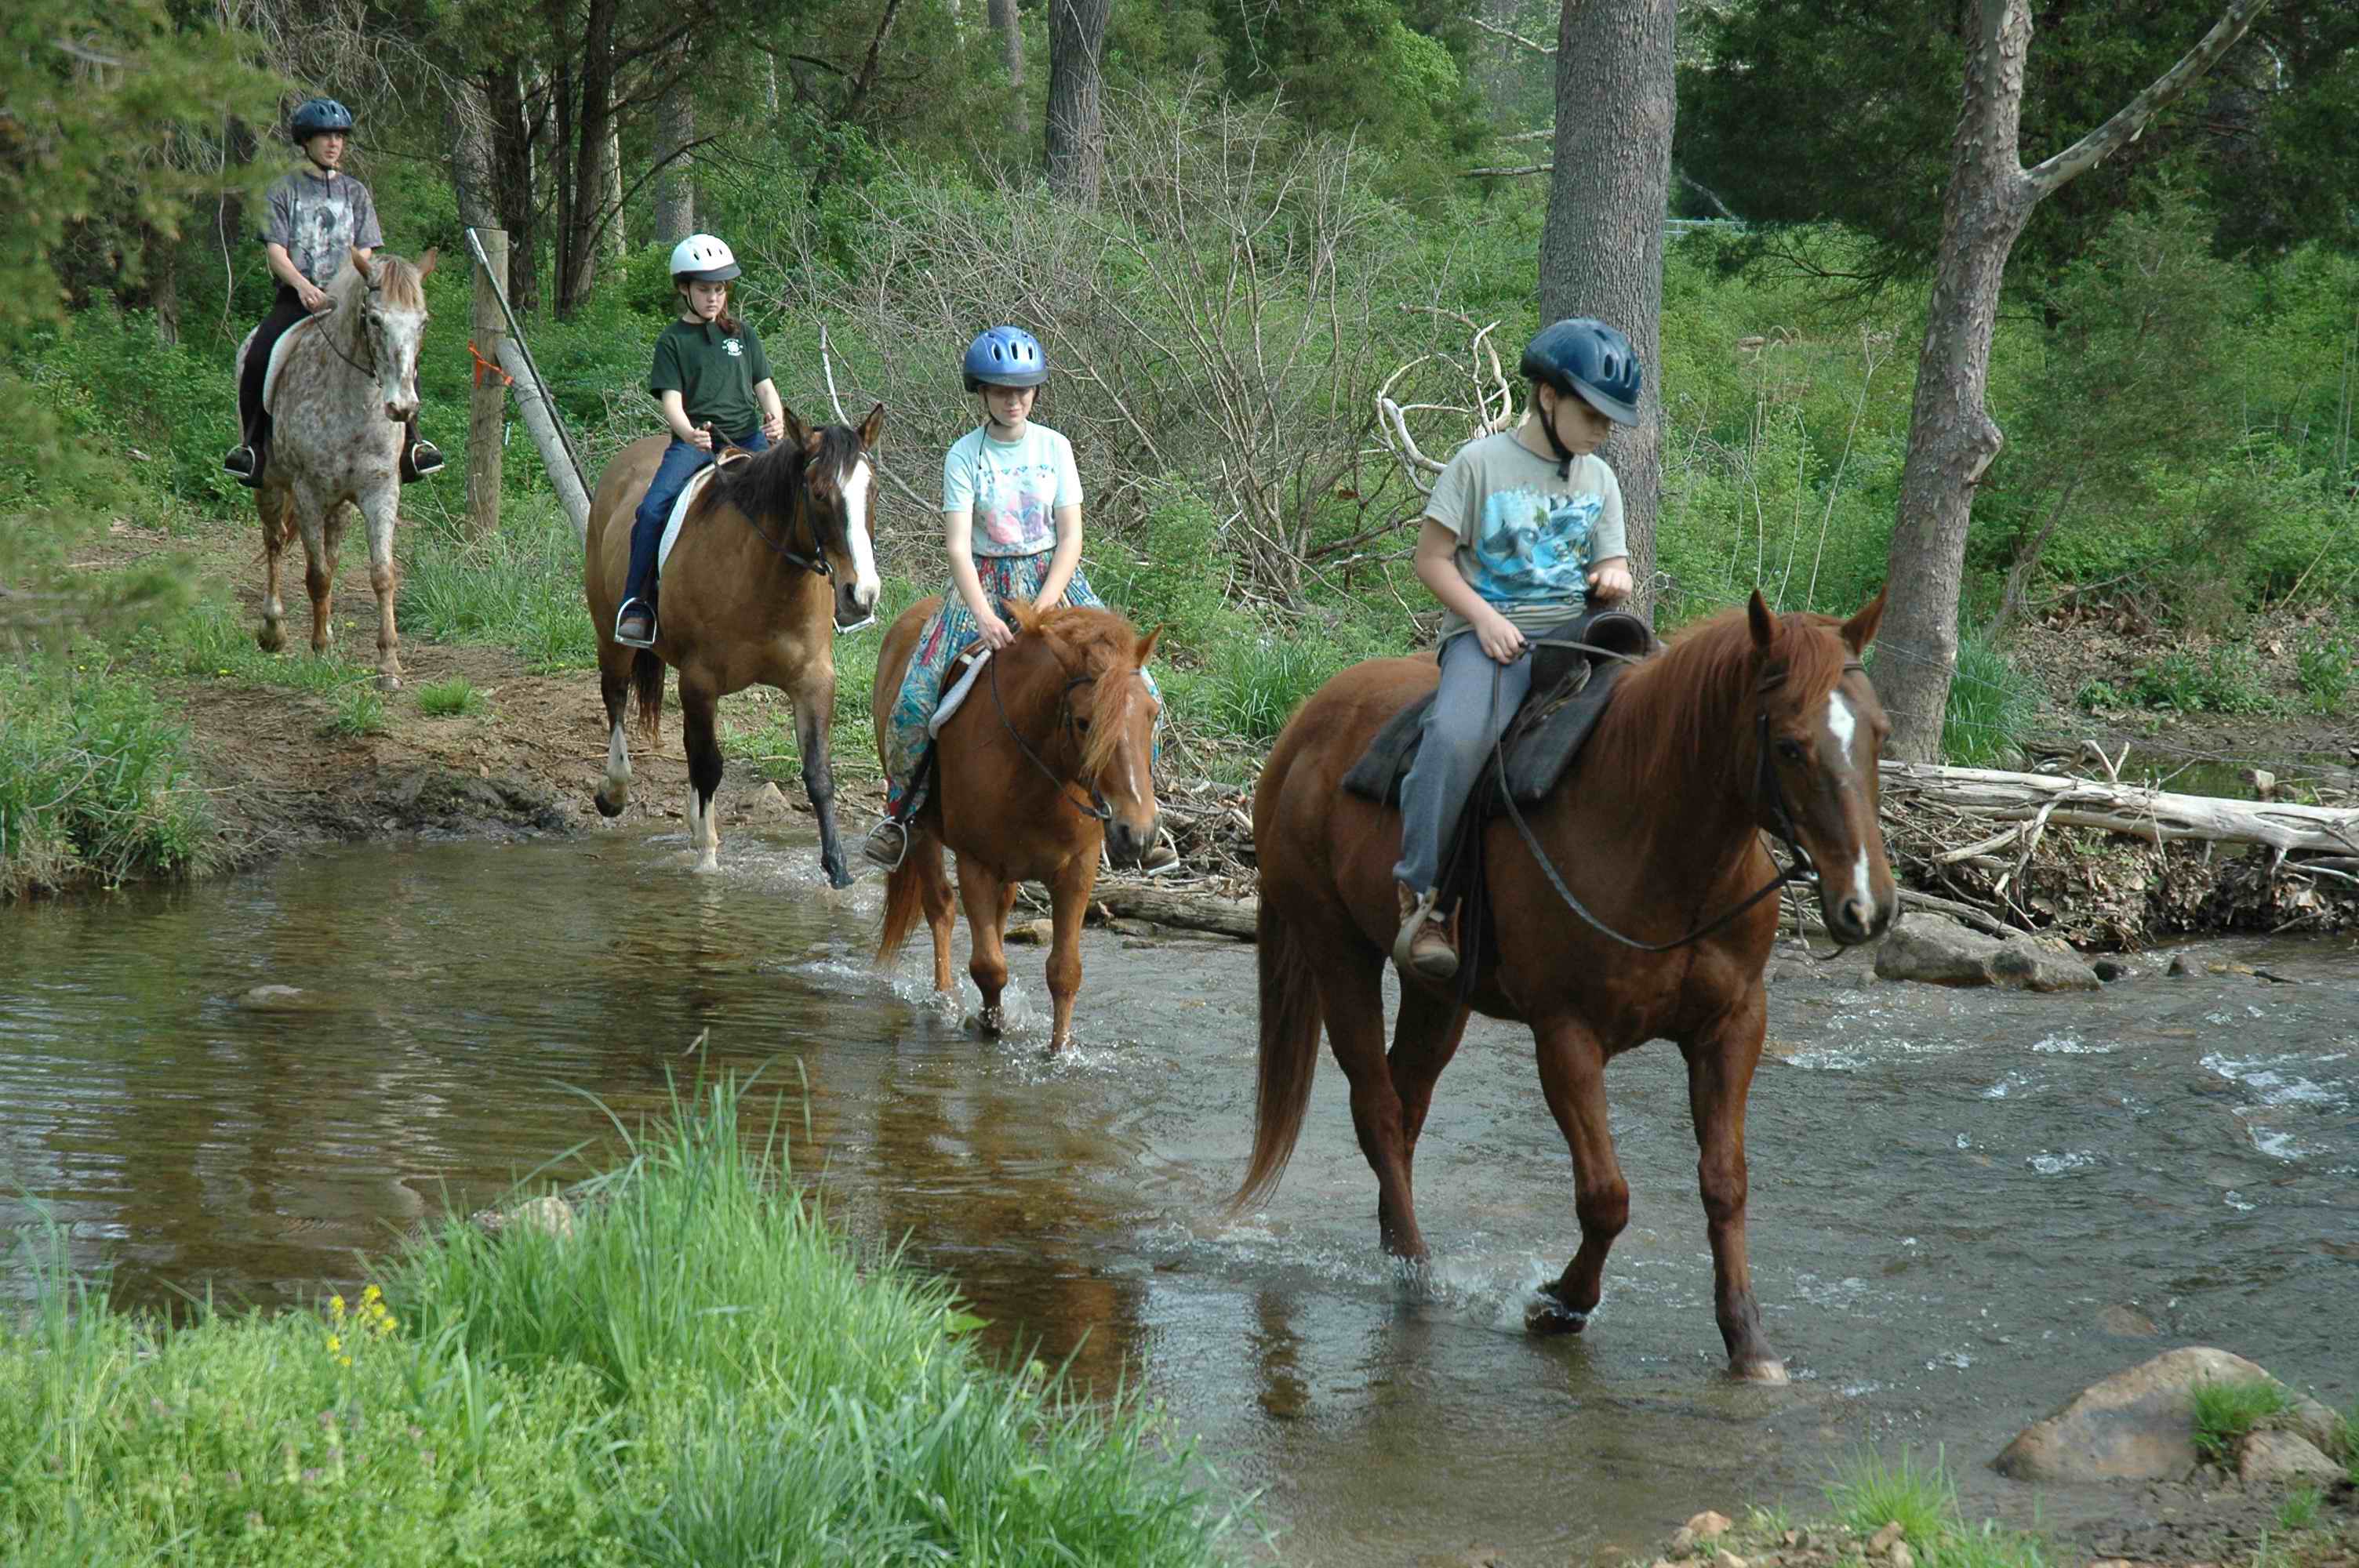 Four people riding horses across a stream on a trail ride.